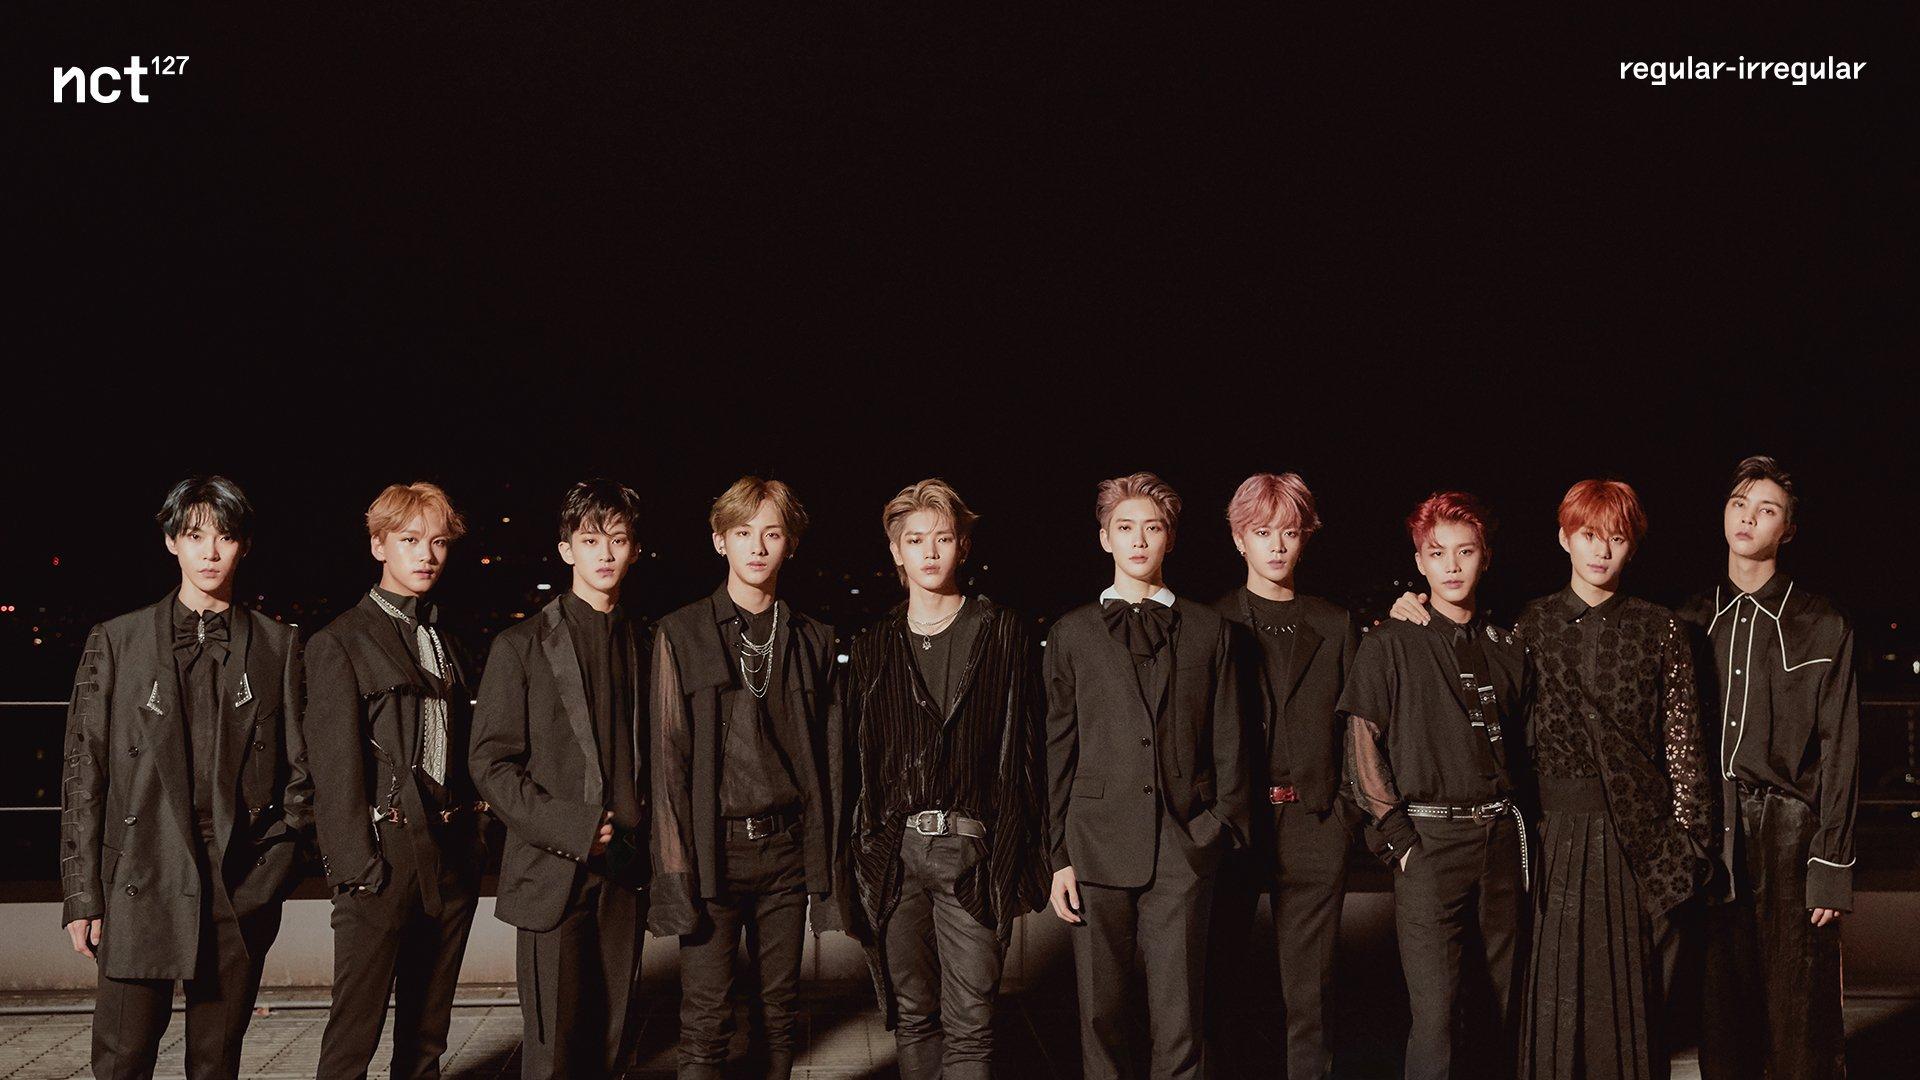 NCT 2020 Computer Wallpaper Free NCT 2020 Computer Background